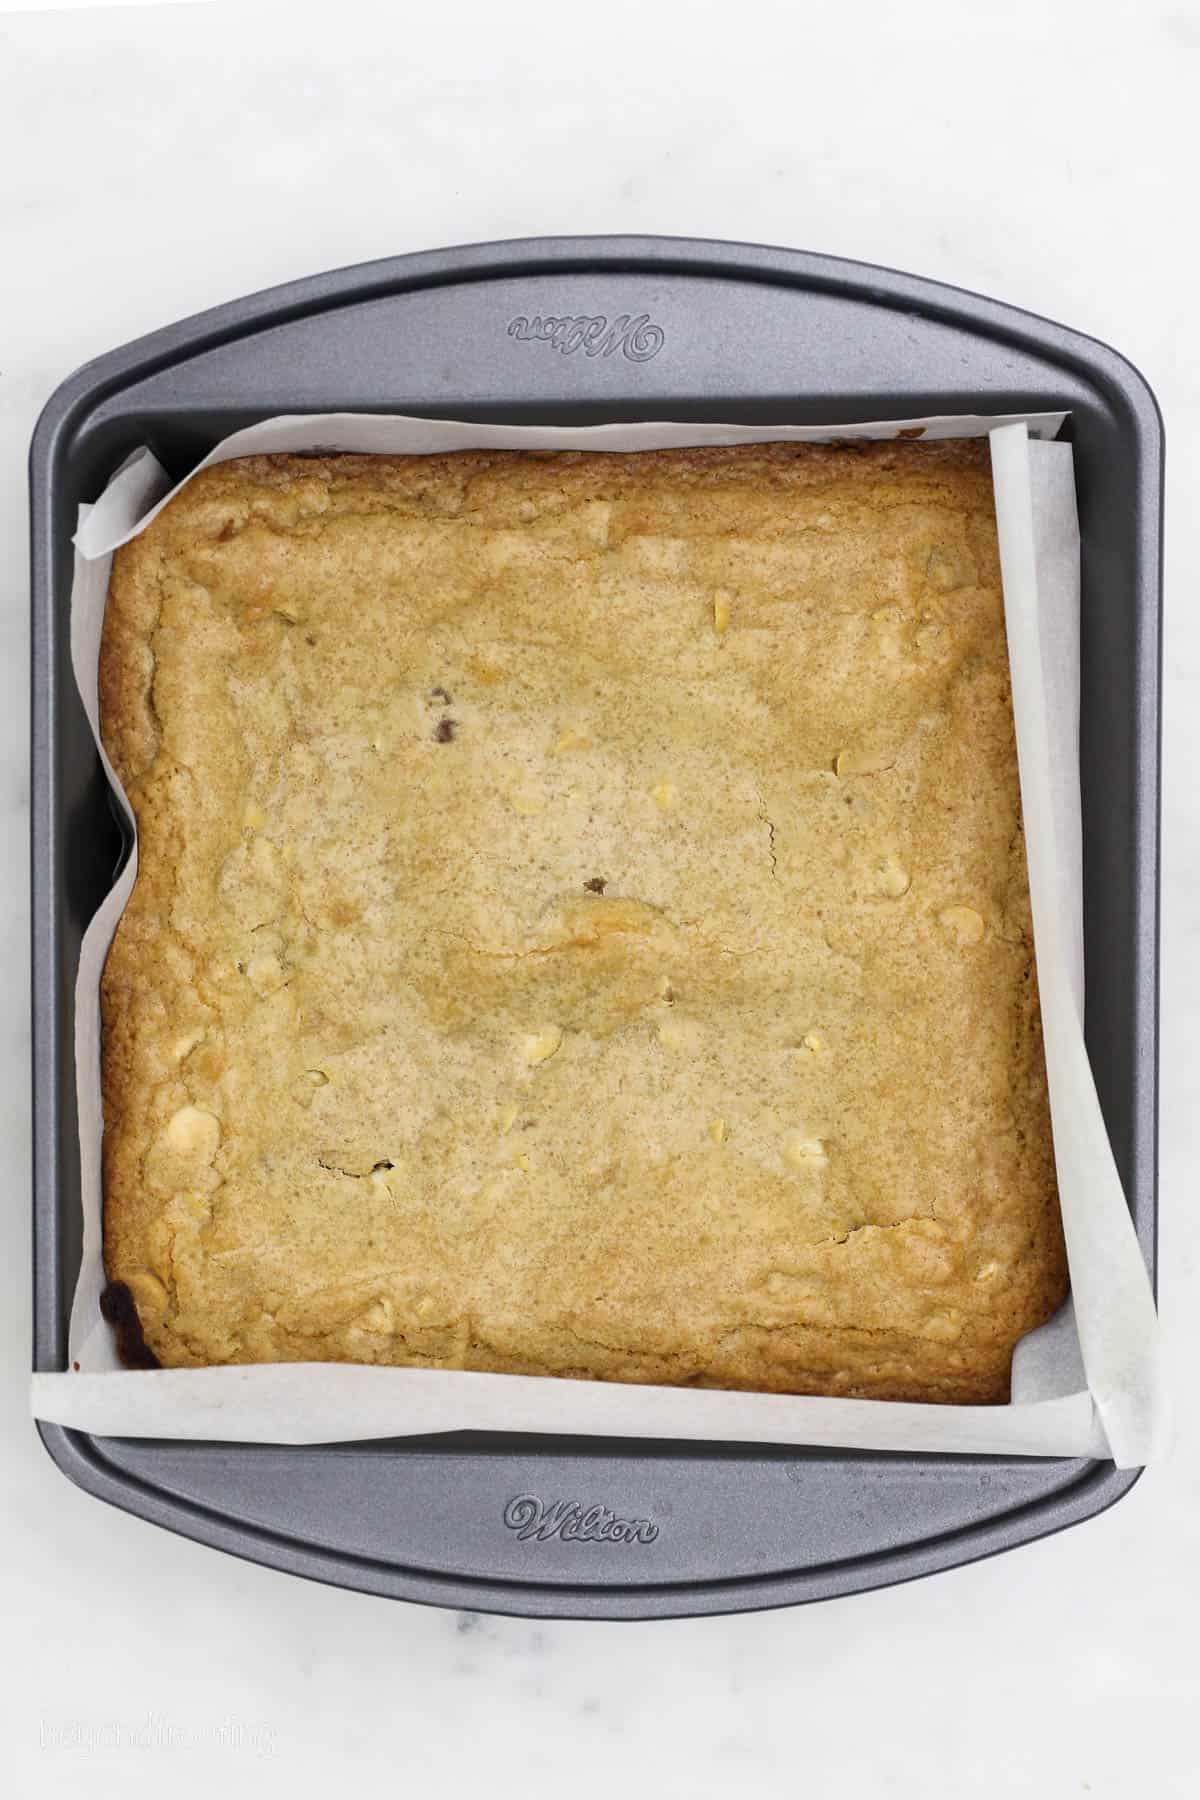 Baked blondies in a parchment-lined cake pan.